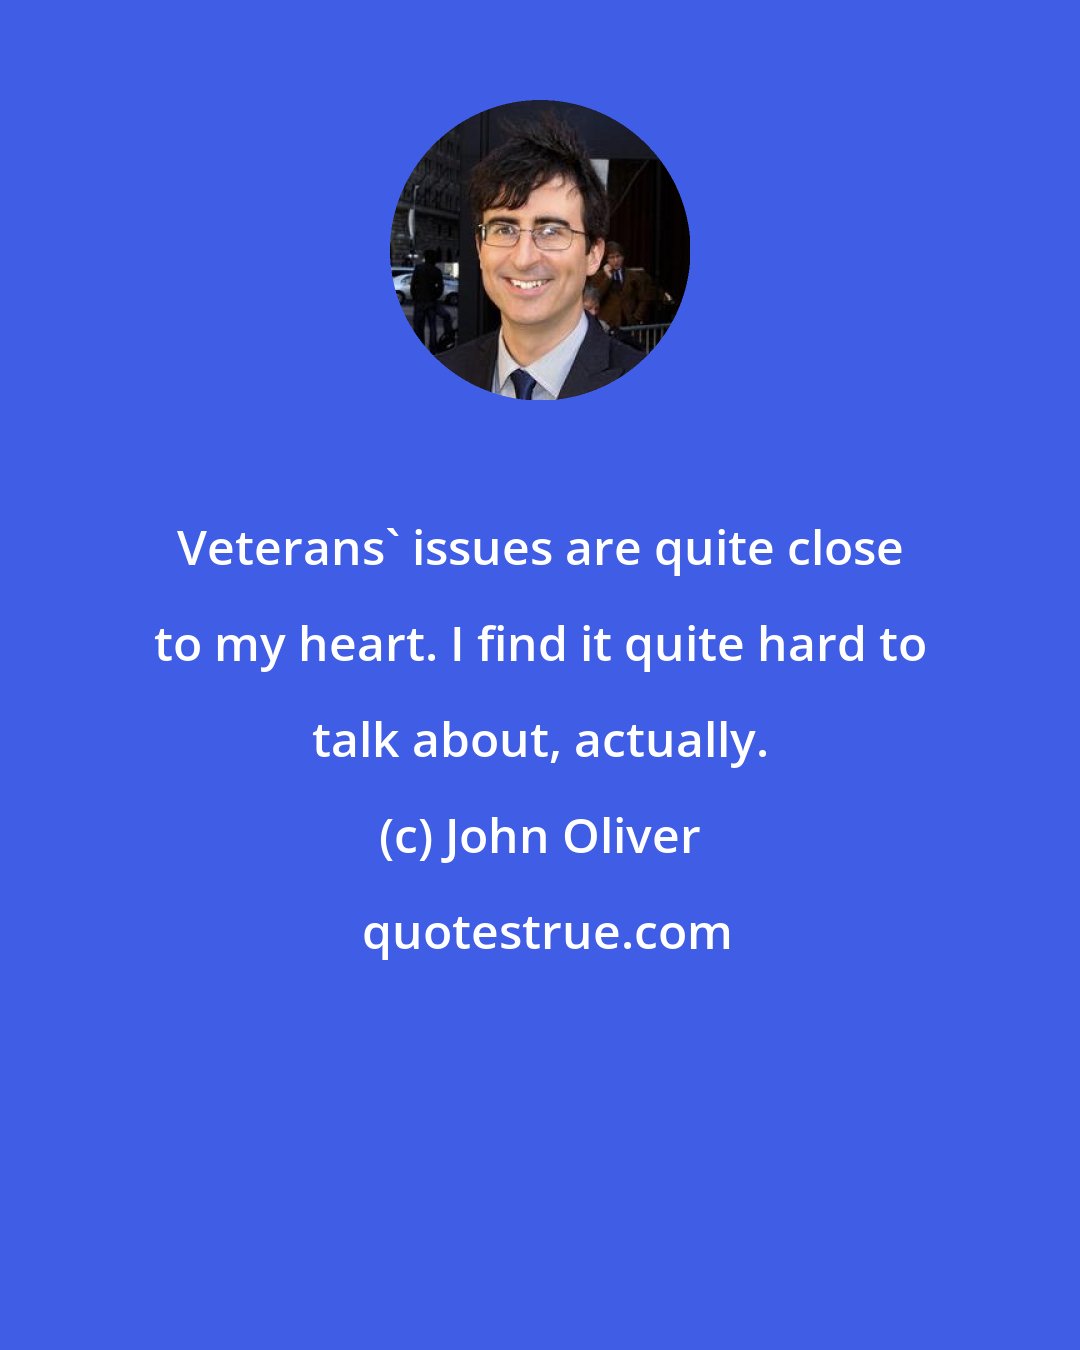 John Oliver: Veterans' issues are quite close to my heart. I find it quite hard to talk about, actually.